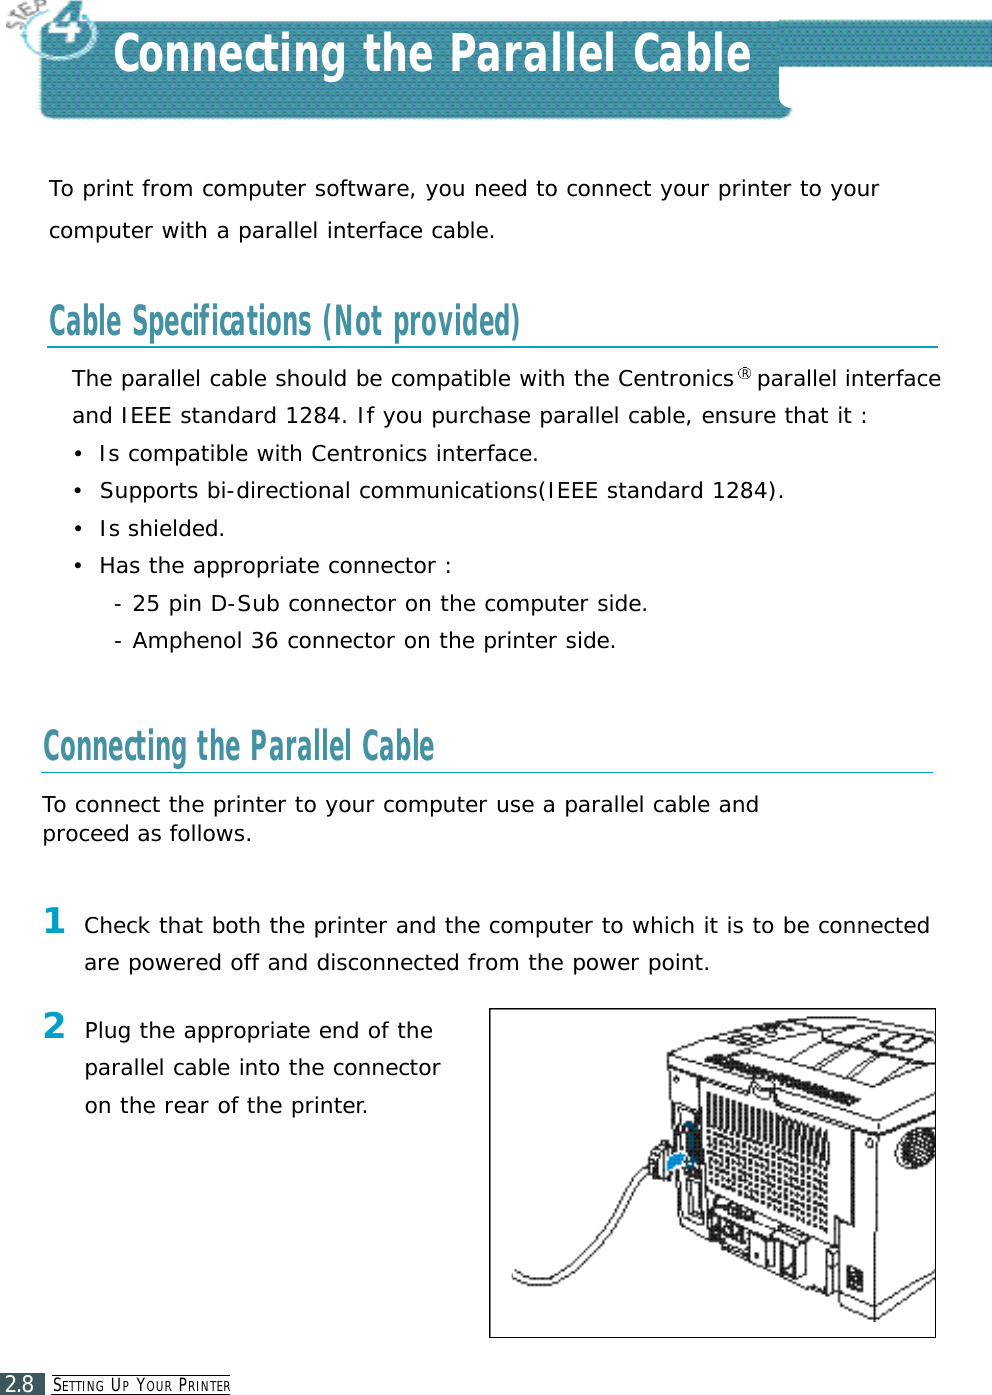 SE T T I N G UPYO U R PR I N T E R2.8To print from computer software, you need to connect your printer to yourcomputer with a parallel interface cable.The parallel cable should be compatible with the Centronics Rparallel interface and IEEE standard 1284. If you purchase parallel cable, ensure that it :•Is compatible with Centronics interface.•Supports bi-directional communications(IEEE standard 1284).•Is shielded.•Has the appropriate connector : - 25 pin D-Sub connector on the computer side.- Amphenol 36 connector on the printer side.Connecting the Parallel CableCable Specifications (Not provided)Connecting the Parallel Cable2Plug the appropriate end of theparallel cable into the connectoron the rear of the printer.To connect the printer to your computer use a parallel cable and proceed as follows.1Check that both the printer and the computer to which it is to be connectedare powered off and disconnected from the power point.